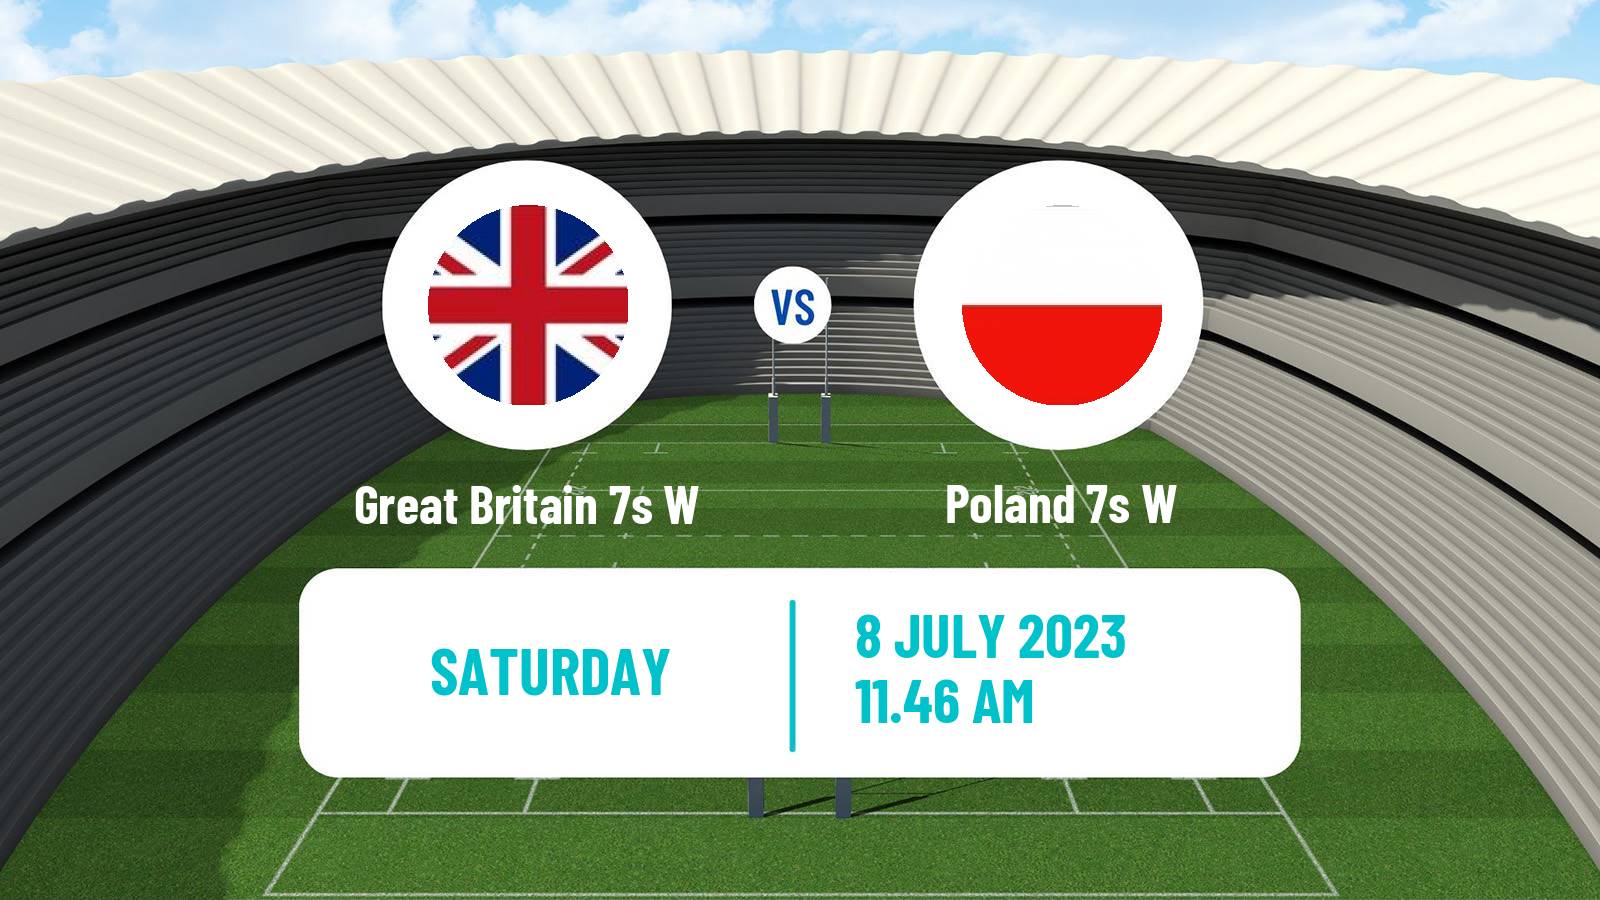 Rugby union Sevens Europe Series Women - Germany Great Britain 7s W - Poland 7s W